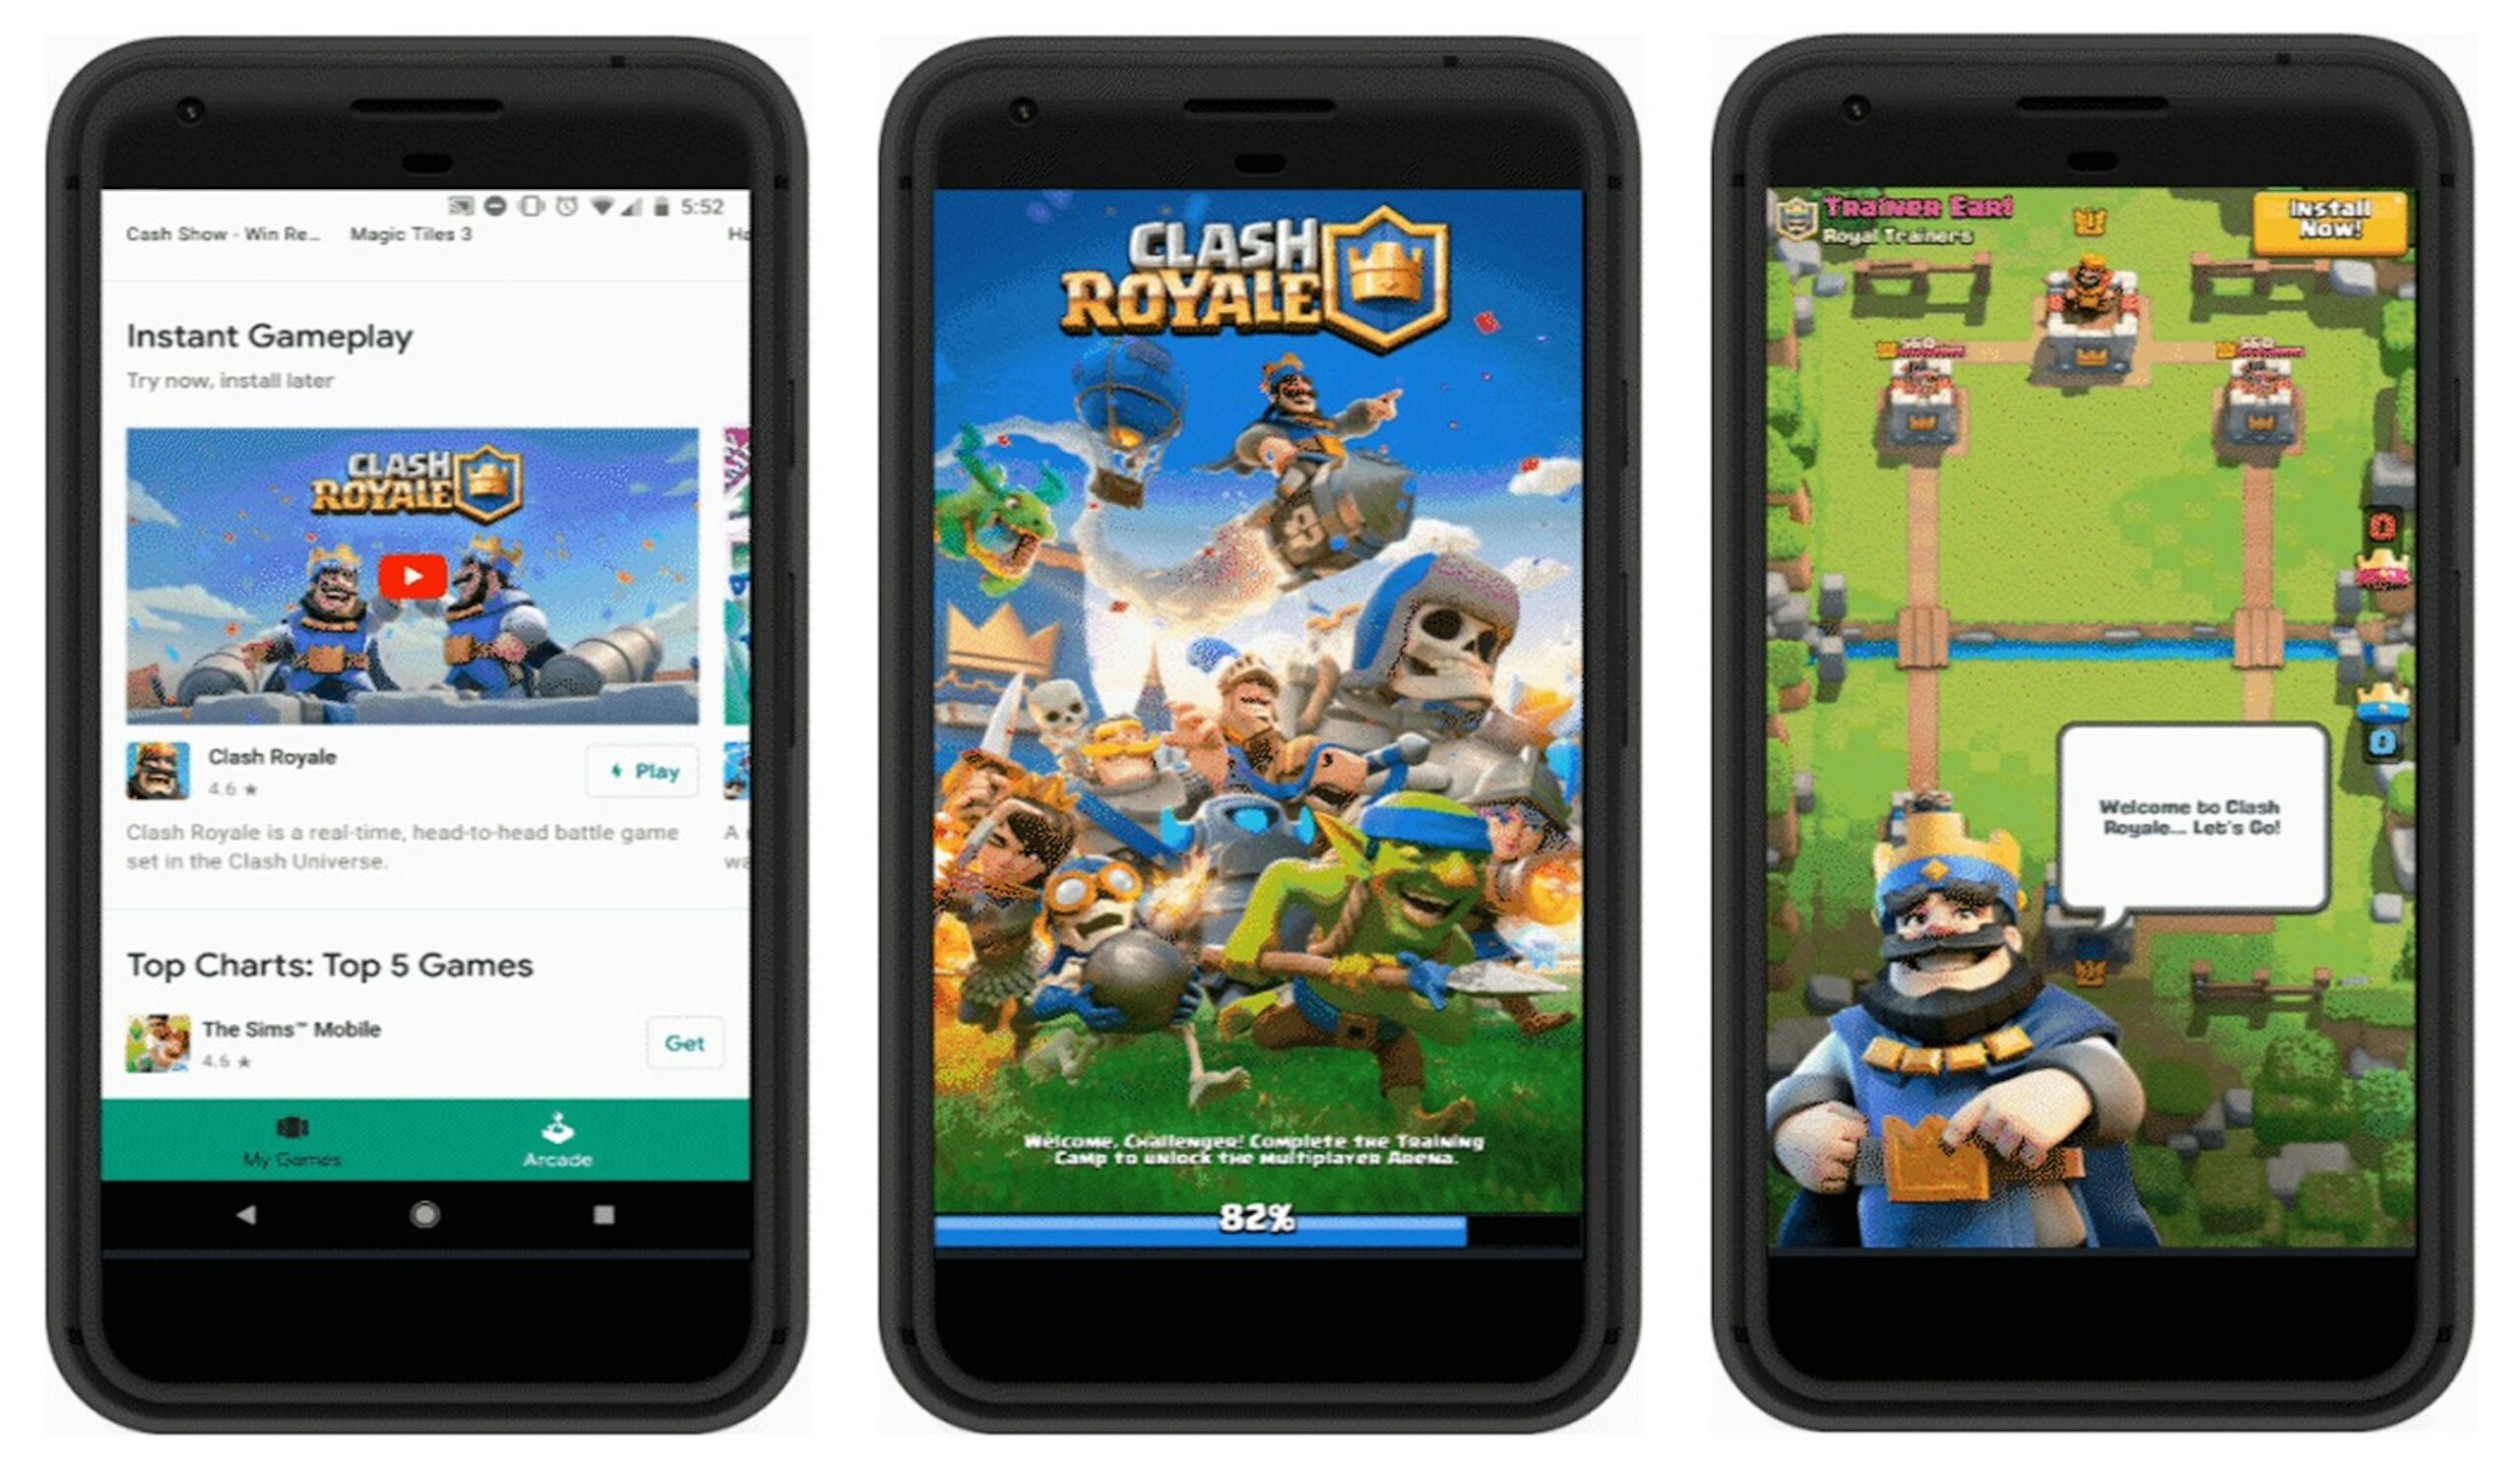 Google Play now lets you try some games without downloading or